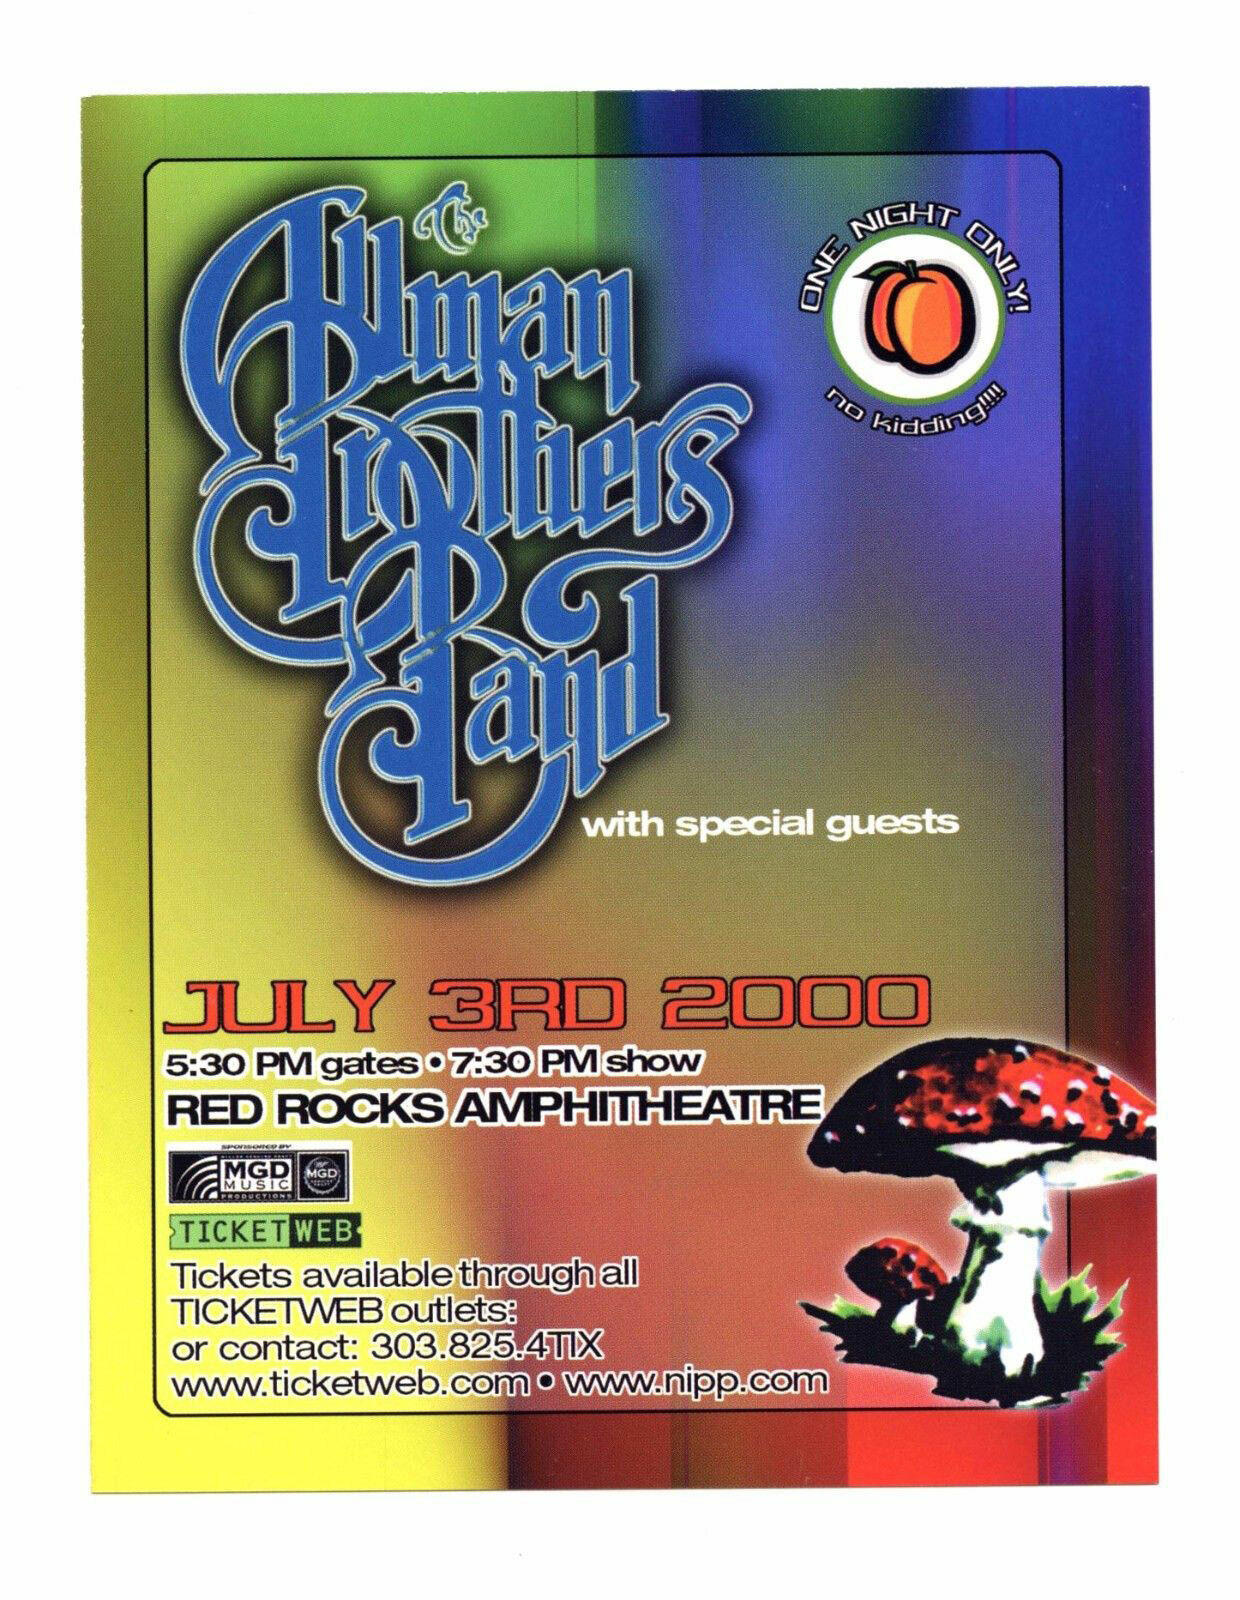 Allman Brothers Band Postcard Ad back 2000 Red Rock Amphitheatre